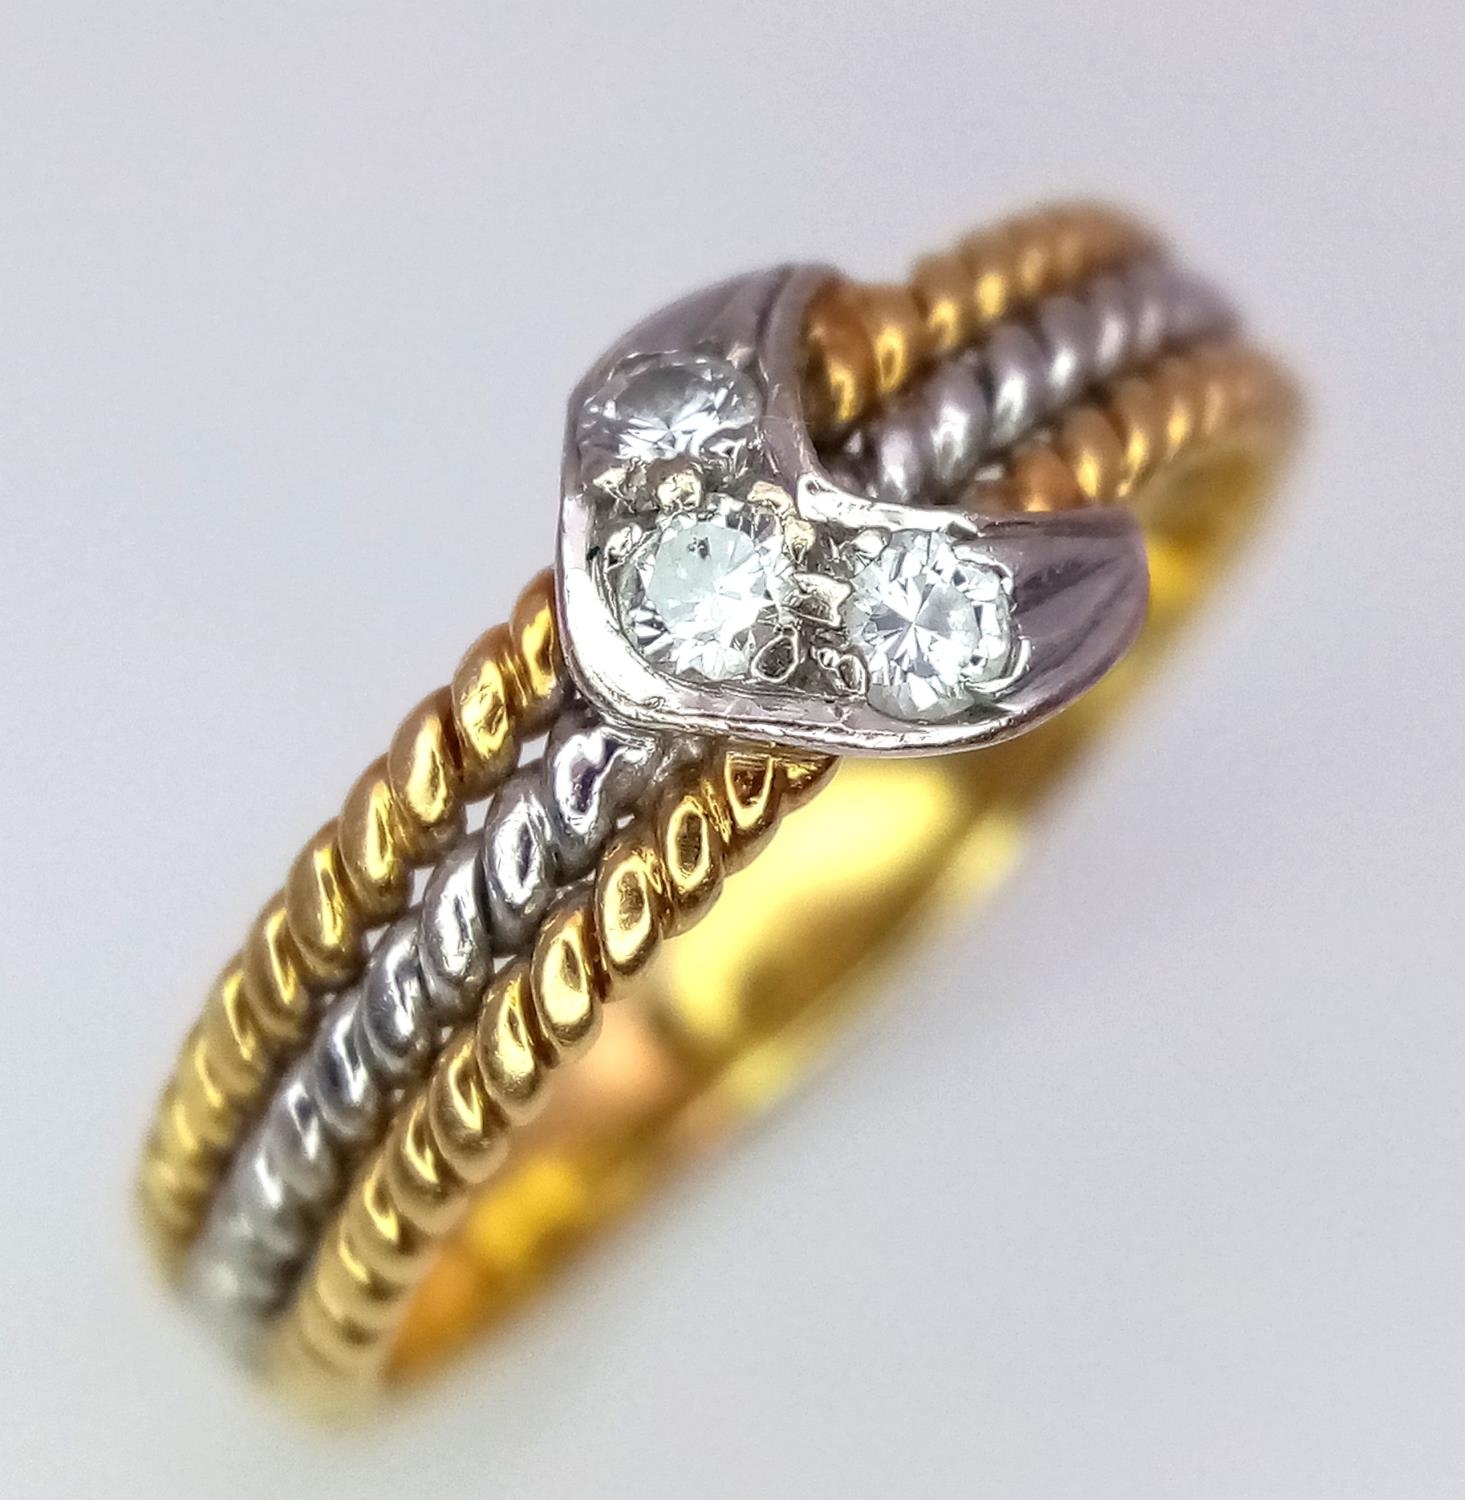 An 18K White and Yellow Gold, Diamond Crescent Ring. Size K. 2.85g total weight. - Image 2 of 5